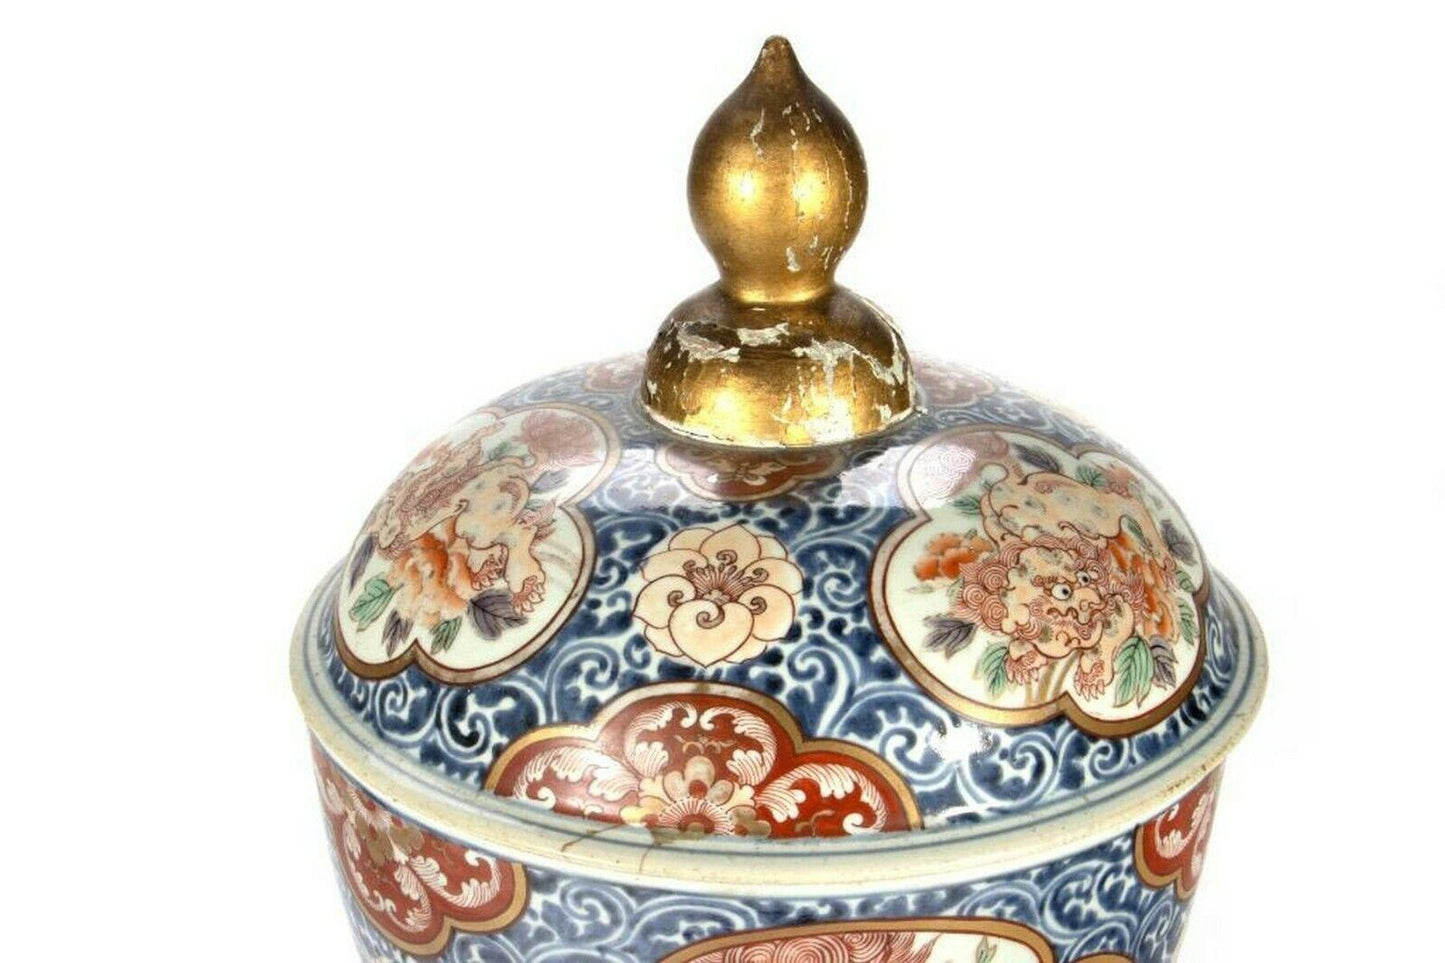 Japanese Imari 17/18th Century Covered Bowl 16 1/2 Inches in height